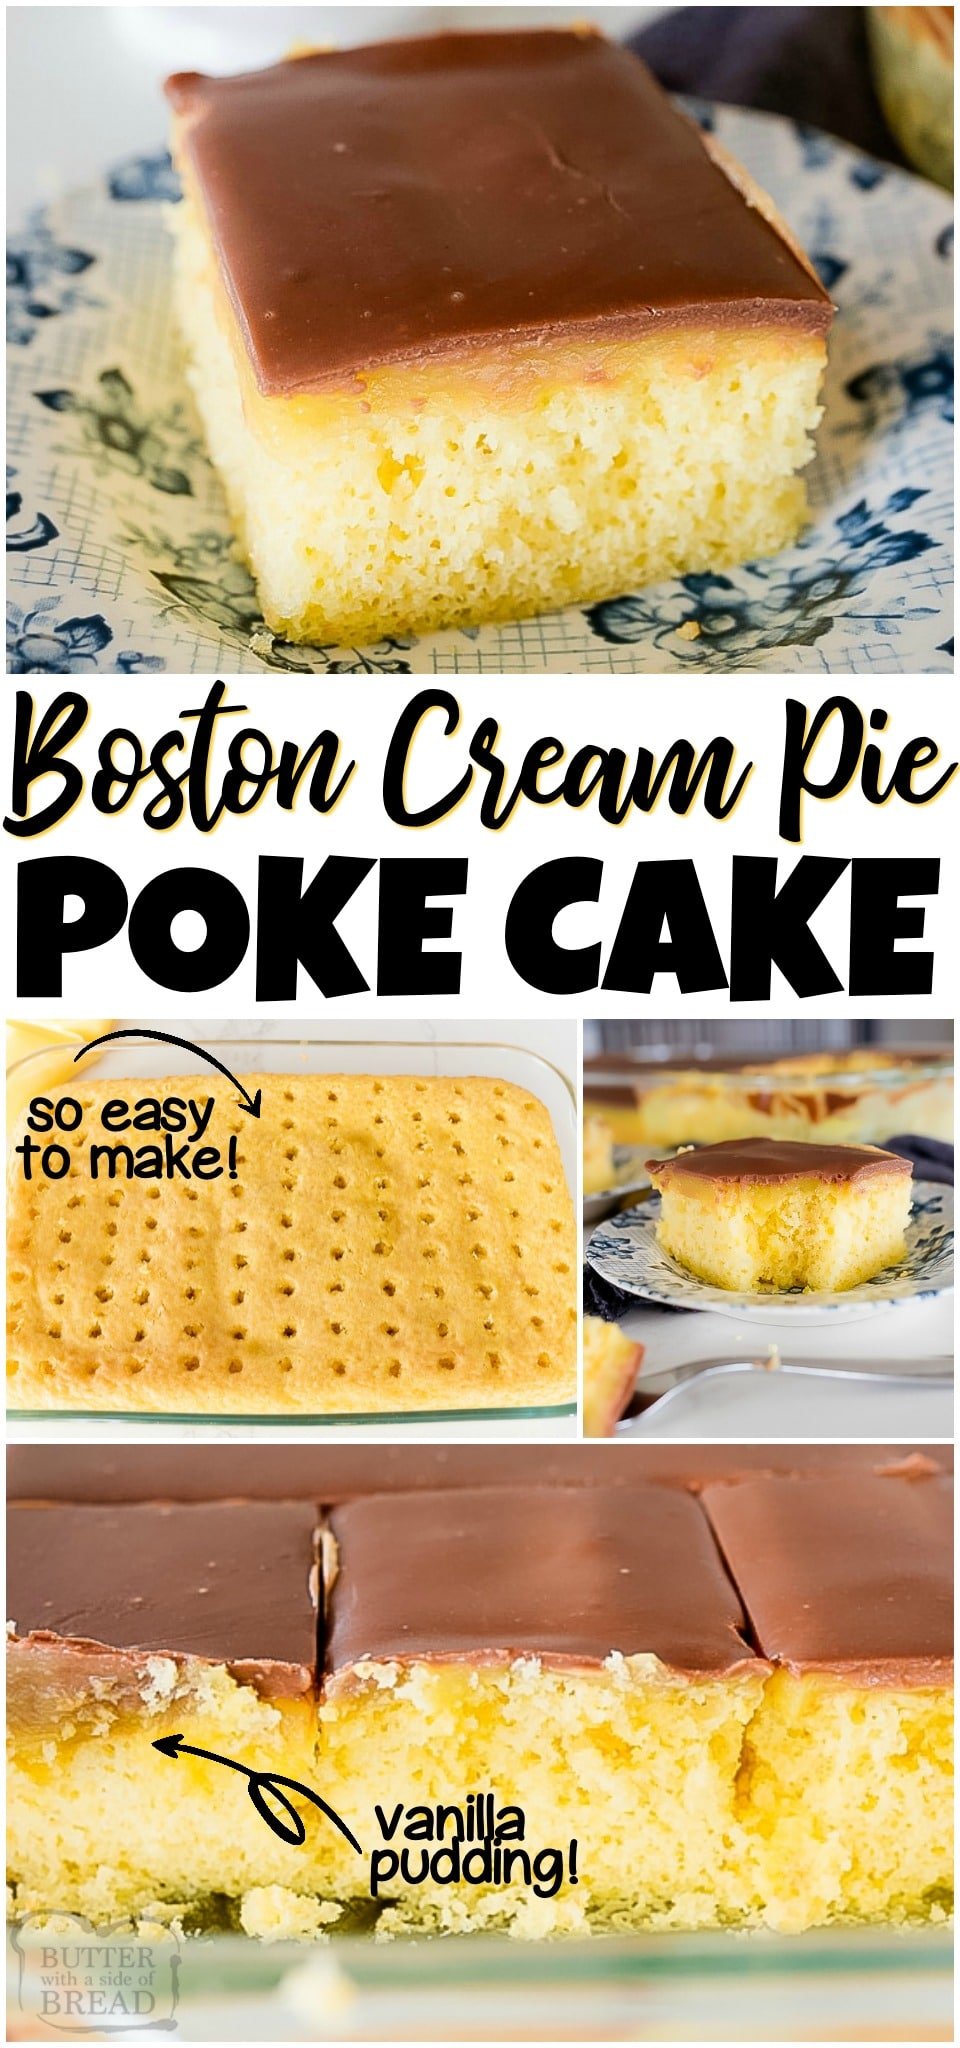 Boston Cream Pie Poke Cake is a yellow cake, poked & filled with vanilla pudding then topped with smooth chocolate ganache. This poke cake recipe mimics Boston Cream Pie, only it's more quick & easy to make! #pokecake #bostoncream #chocolate #cake #baking #recipe #easy #dessert from BUTTER WITH A SIDE OF BREAD